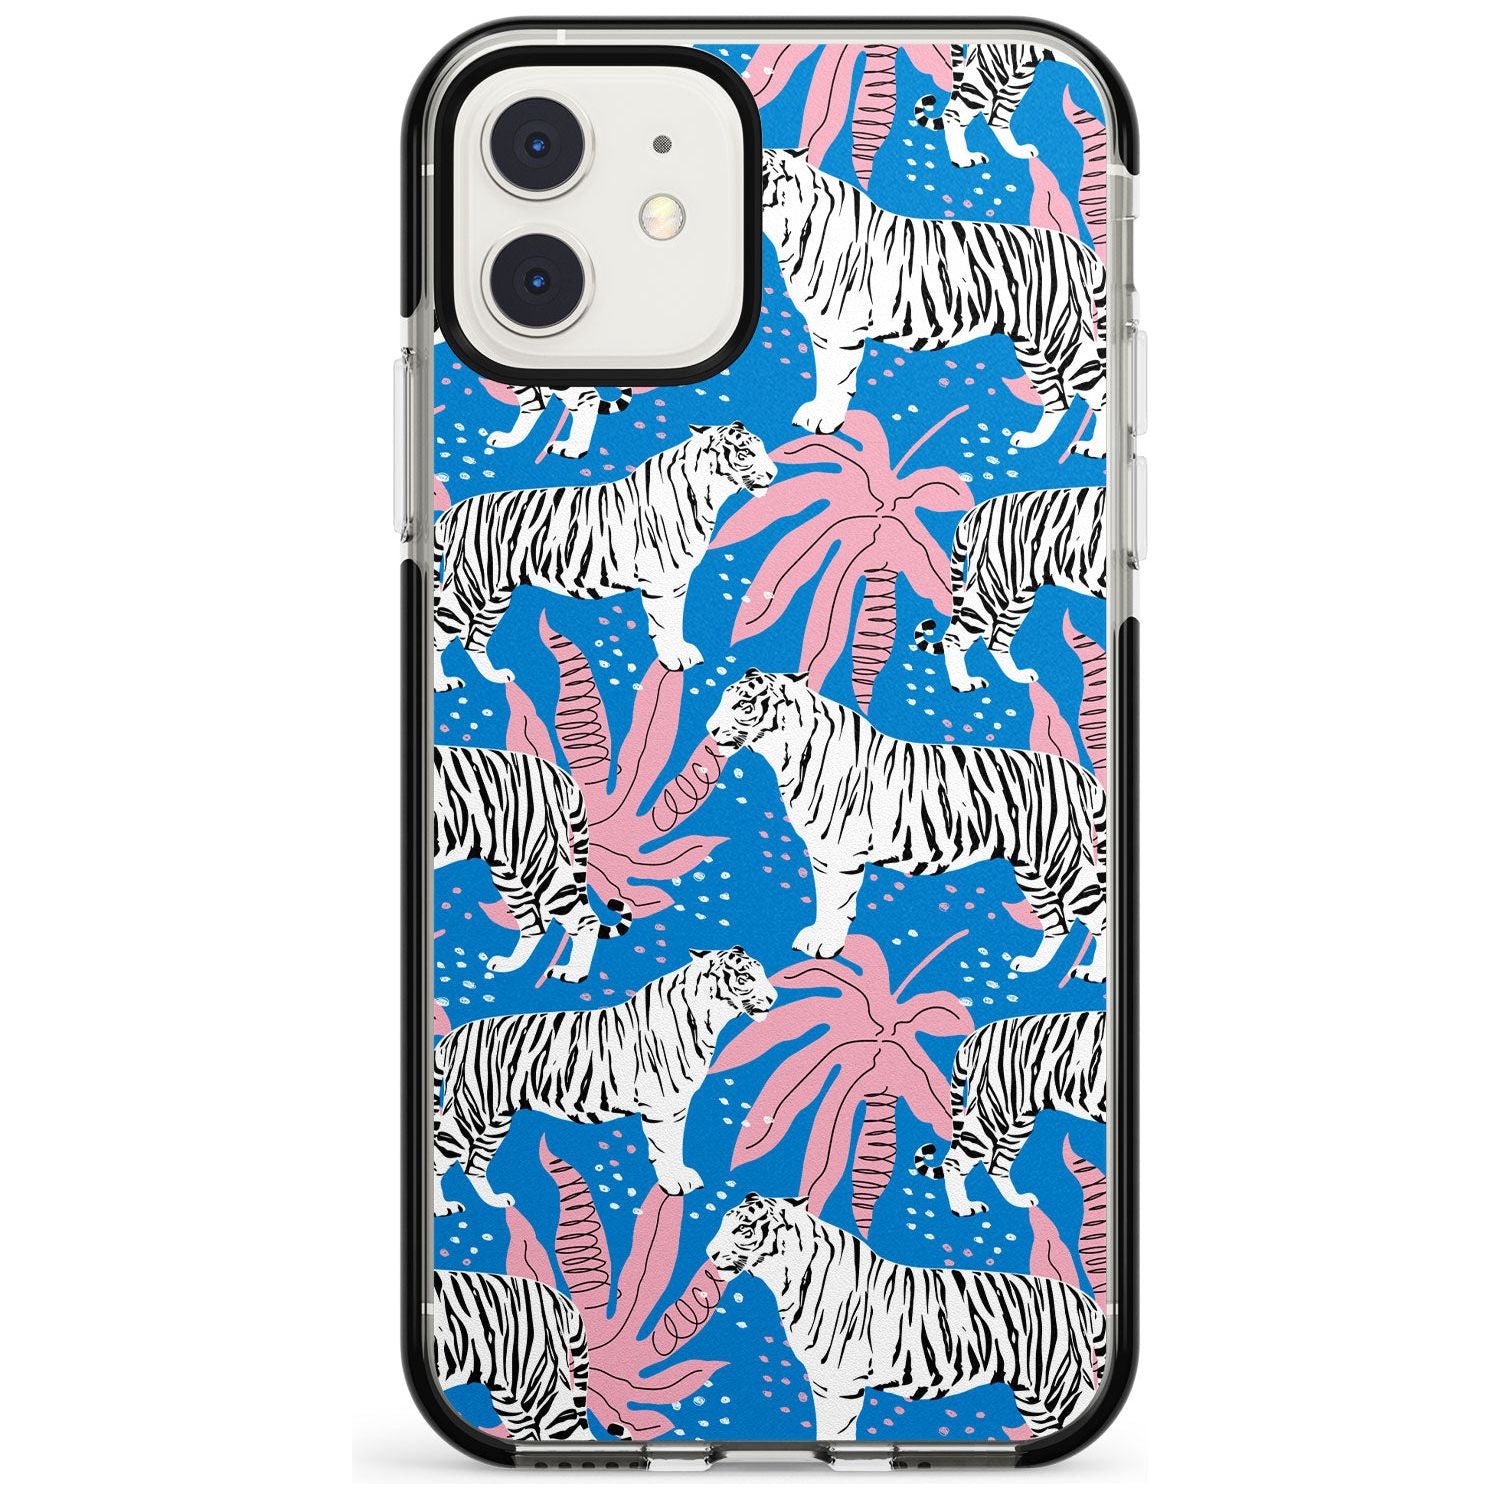 Bengal Blues Black Impact Phone Case for iPhone 11